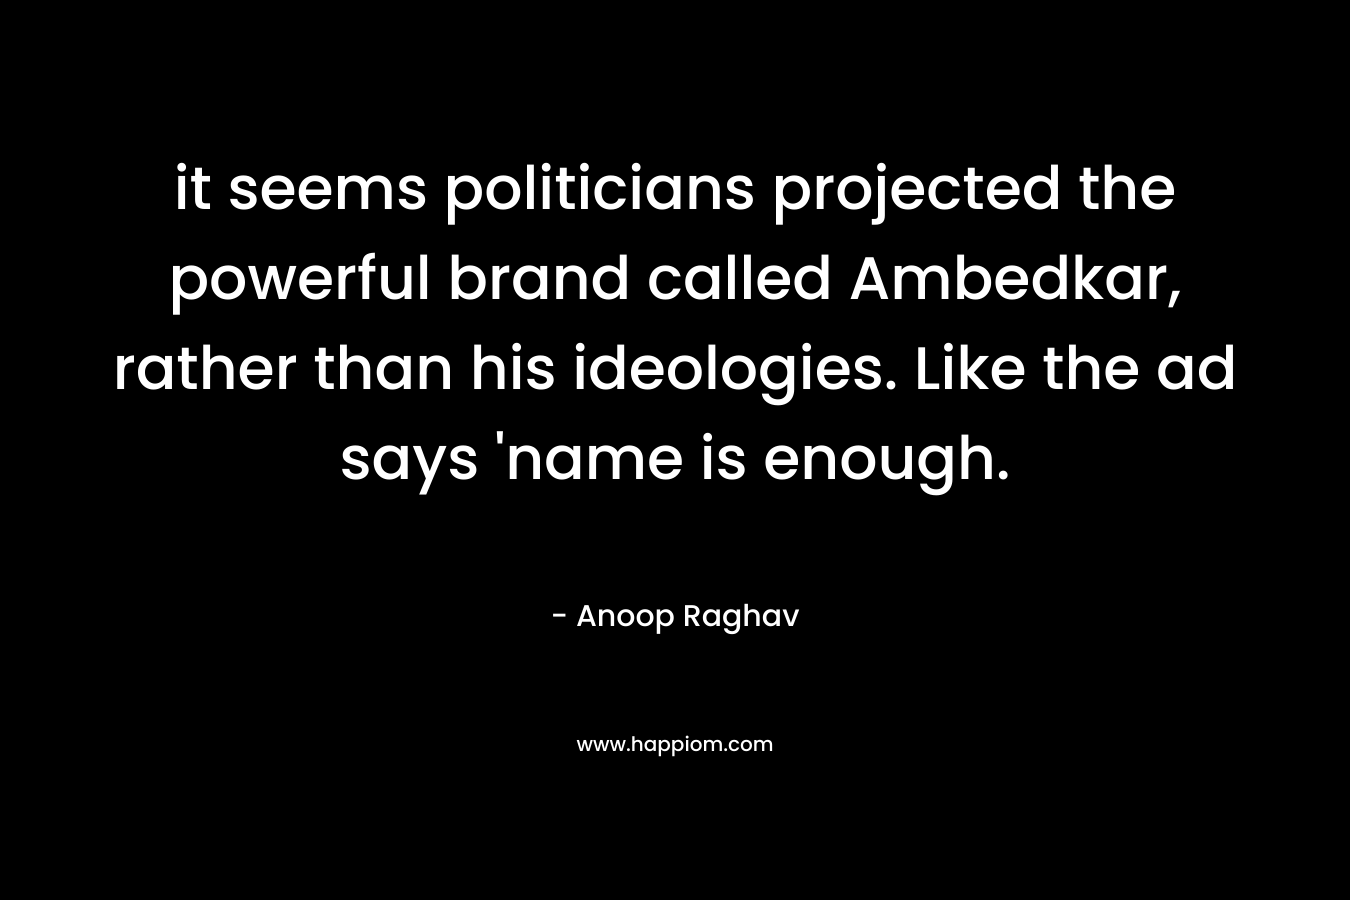 it seems politicians projected the powerful brand called Ambedkar, rather than his ideologies. Like the ad says ‘name is enough. – Anoop Raghav